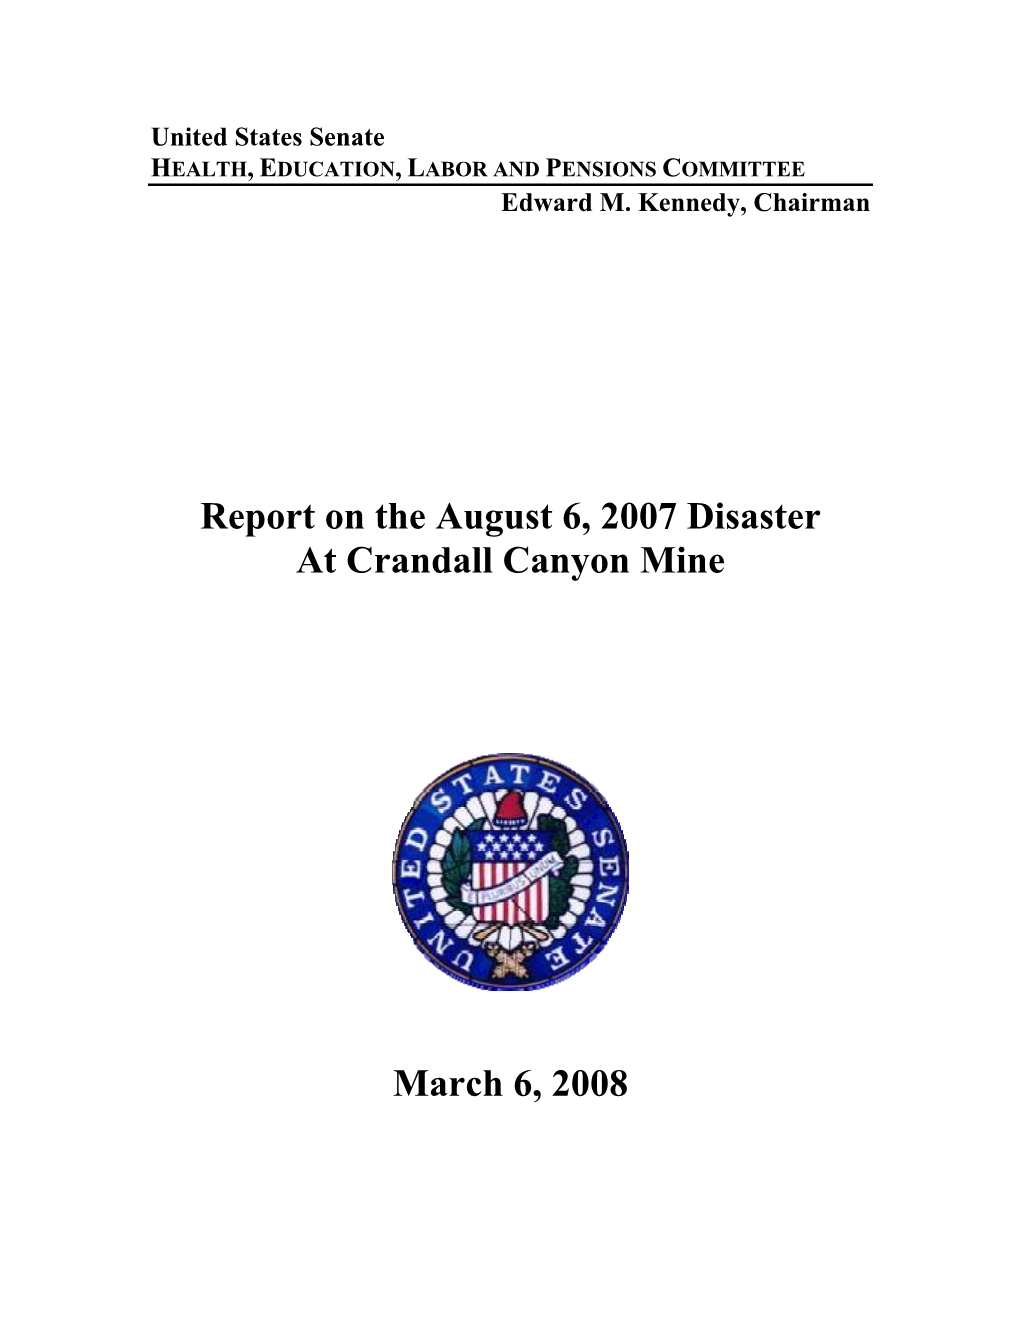 Report on the August 6, 2007 Disaster at Crandall Canyon Mine